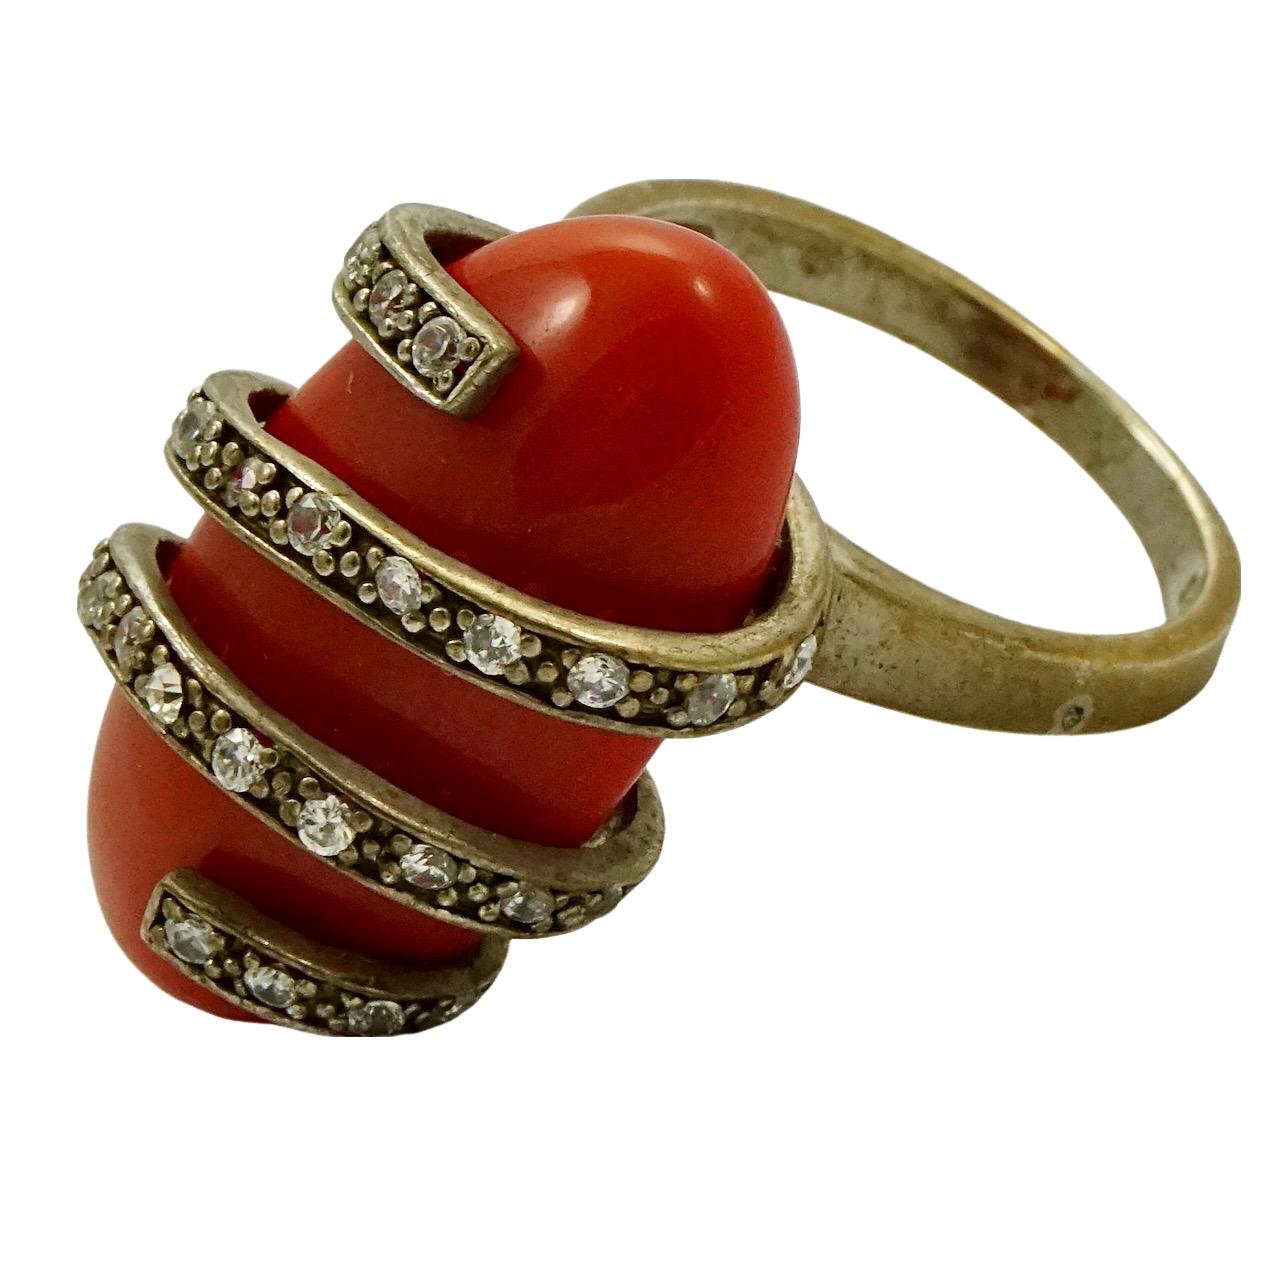 
Lovely gold vermeil on sterling silver ring, featuring a coral glass stone with wrap around rhinestone detail. Ring size UK M / US 6, inside diameter 1.75 cm / .68 inch, and measuring length 2.5 cm / .98 inch. There is scratching and wear as